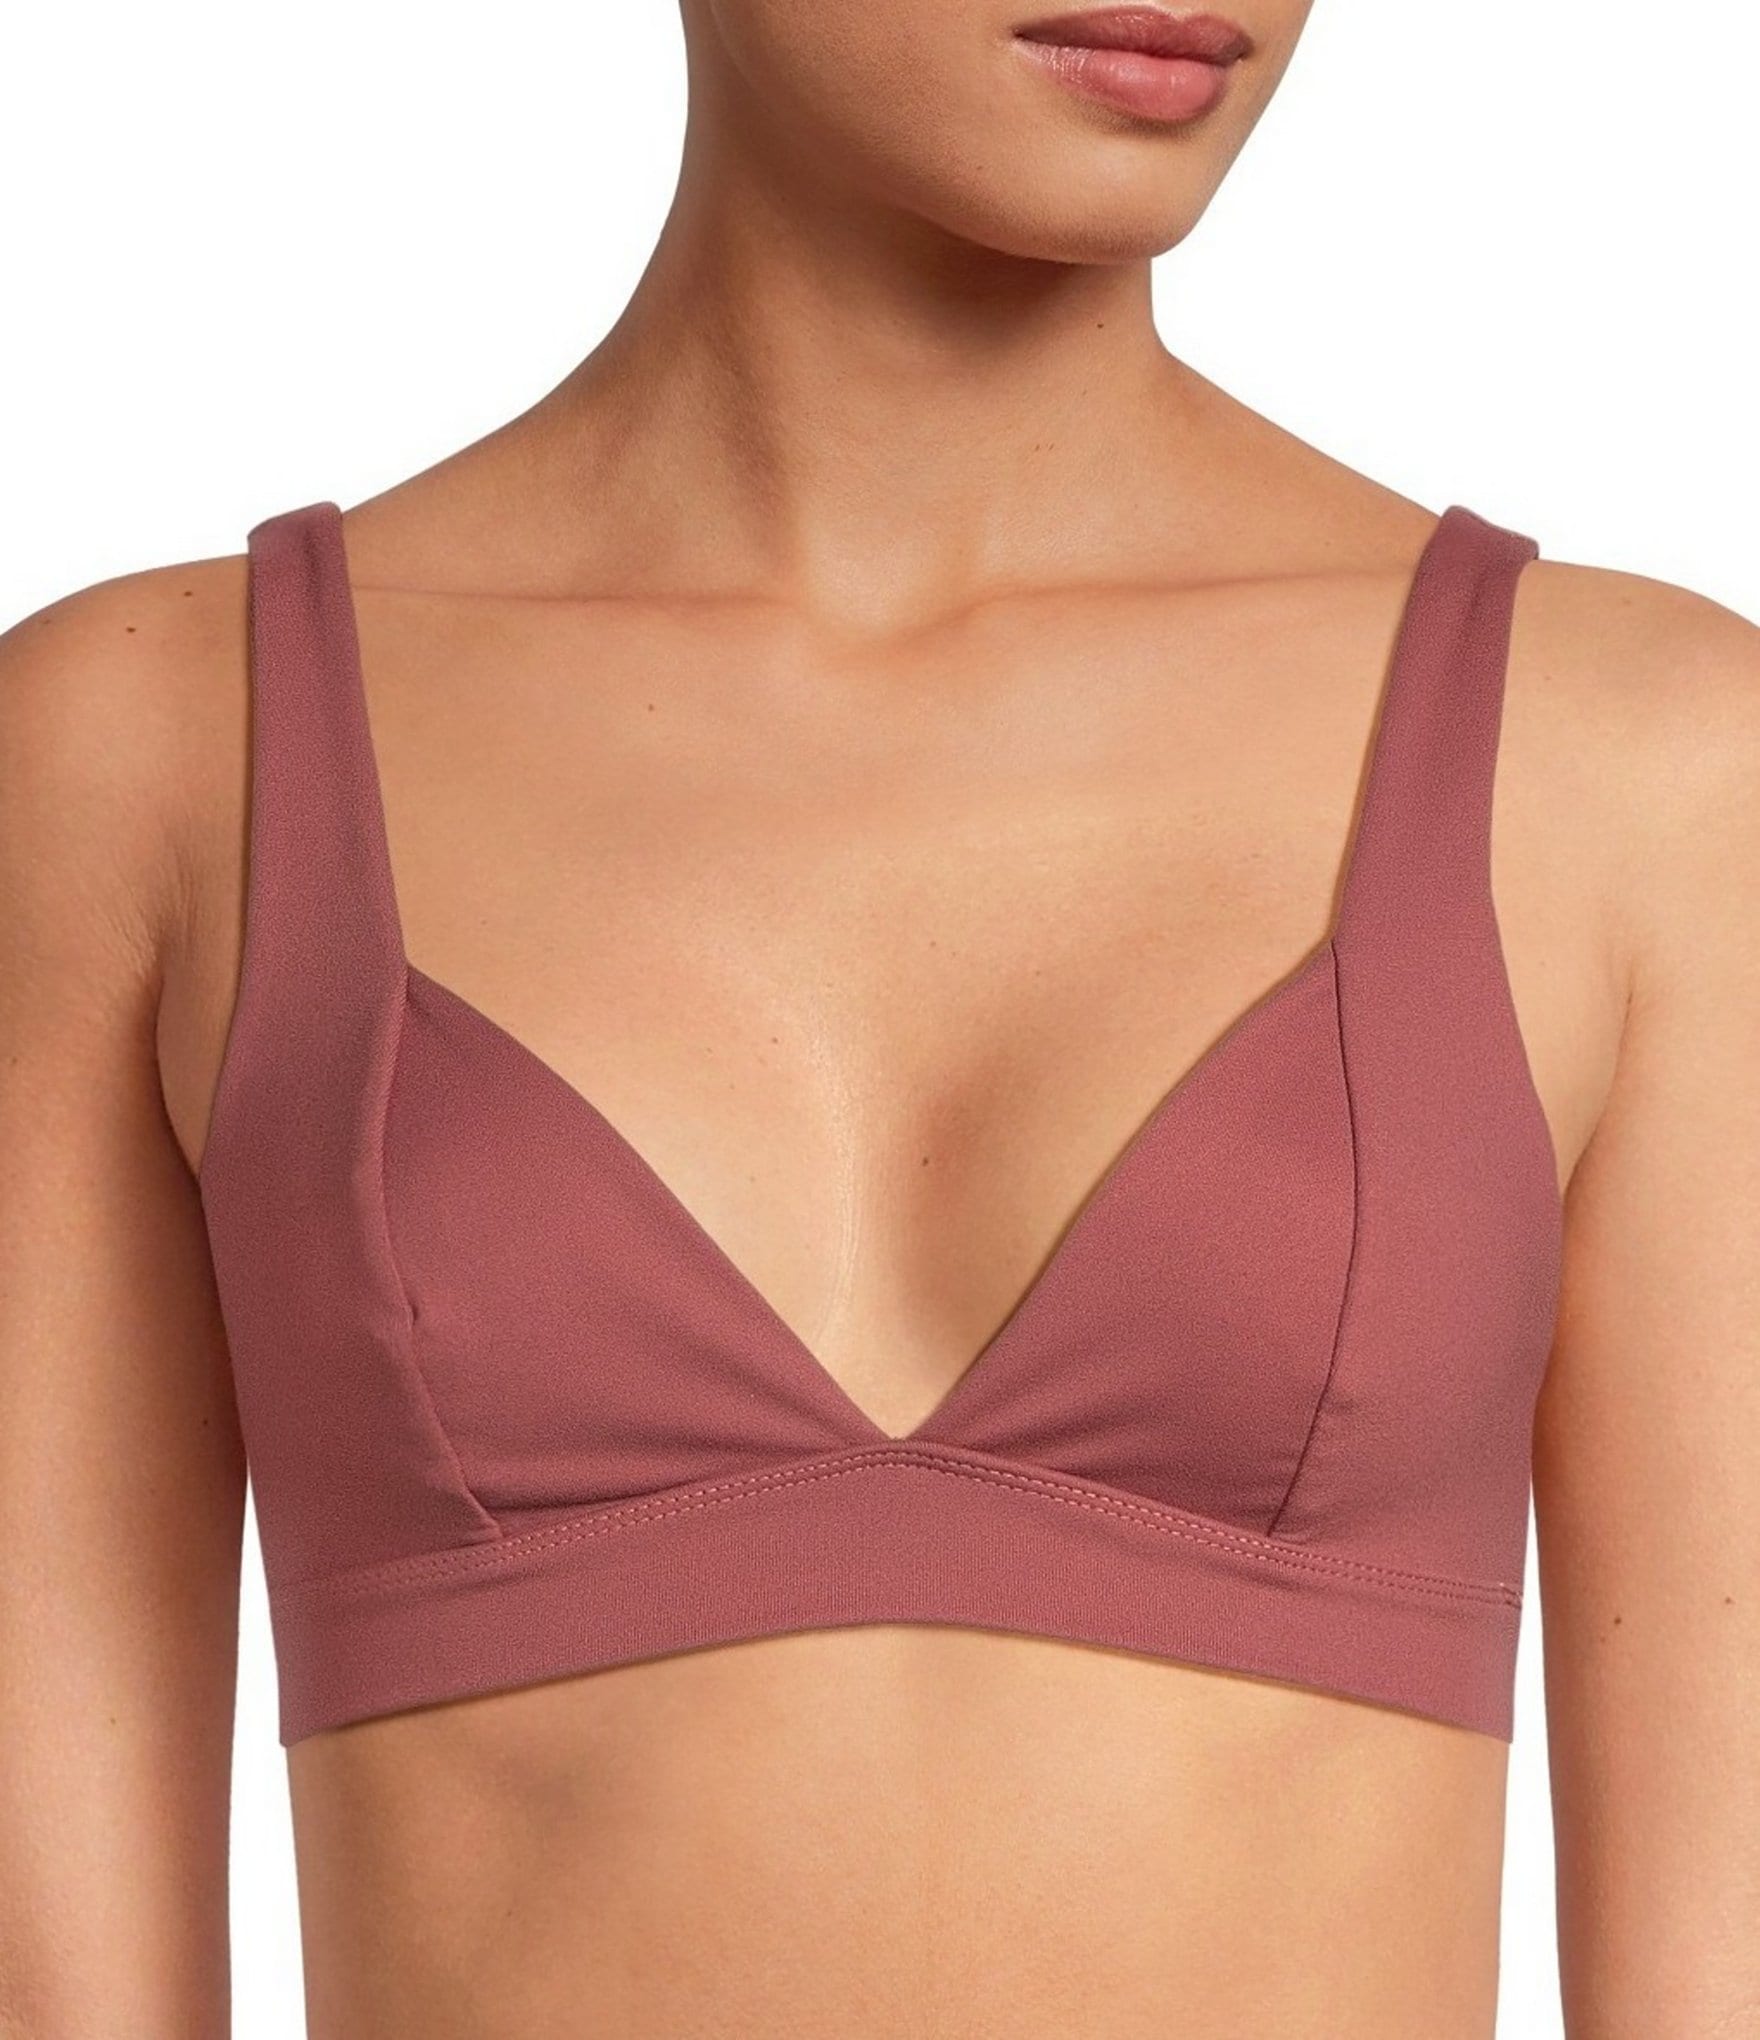 Find more Pink Brand Bras for sale at up to 90% off